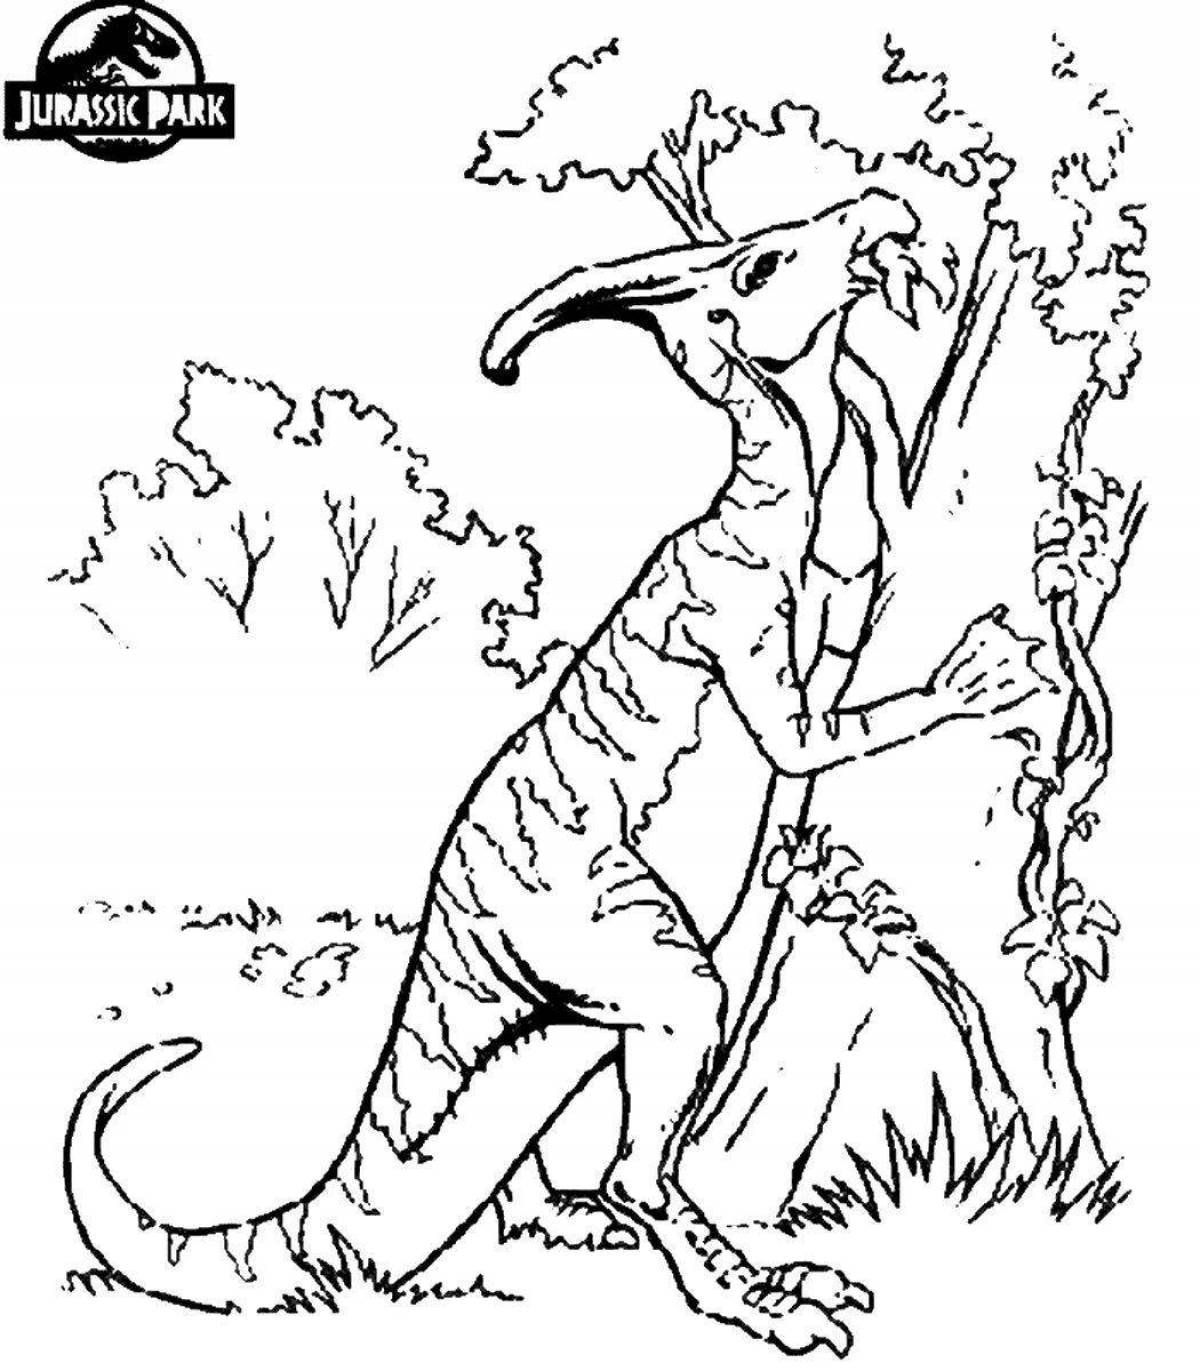 Grand Jurassic Park Coloring Page